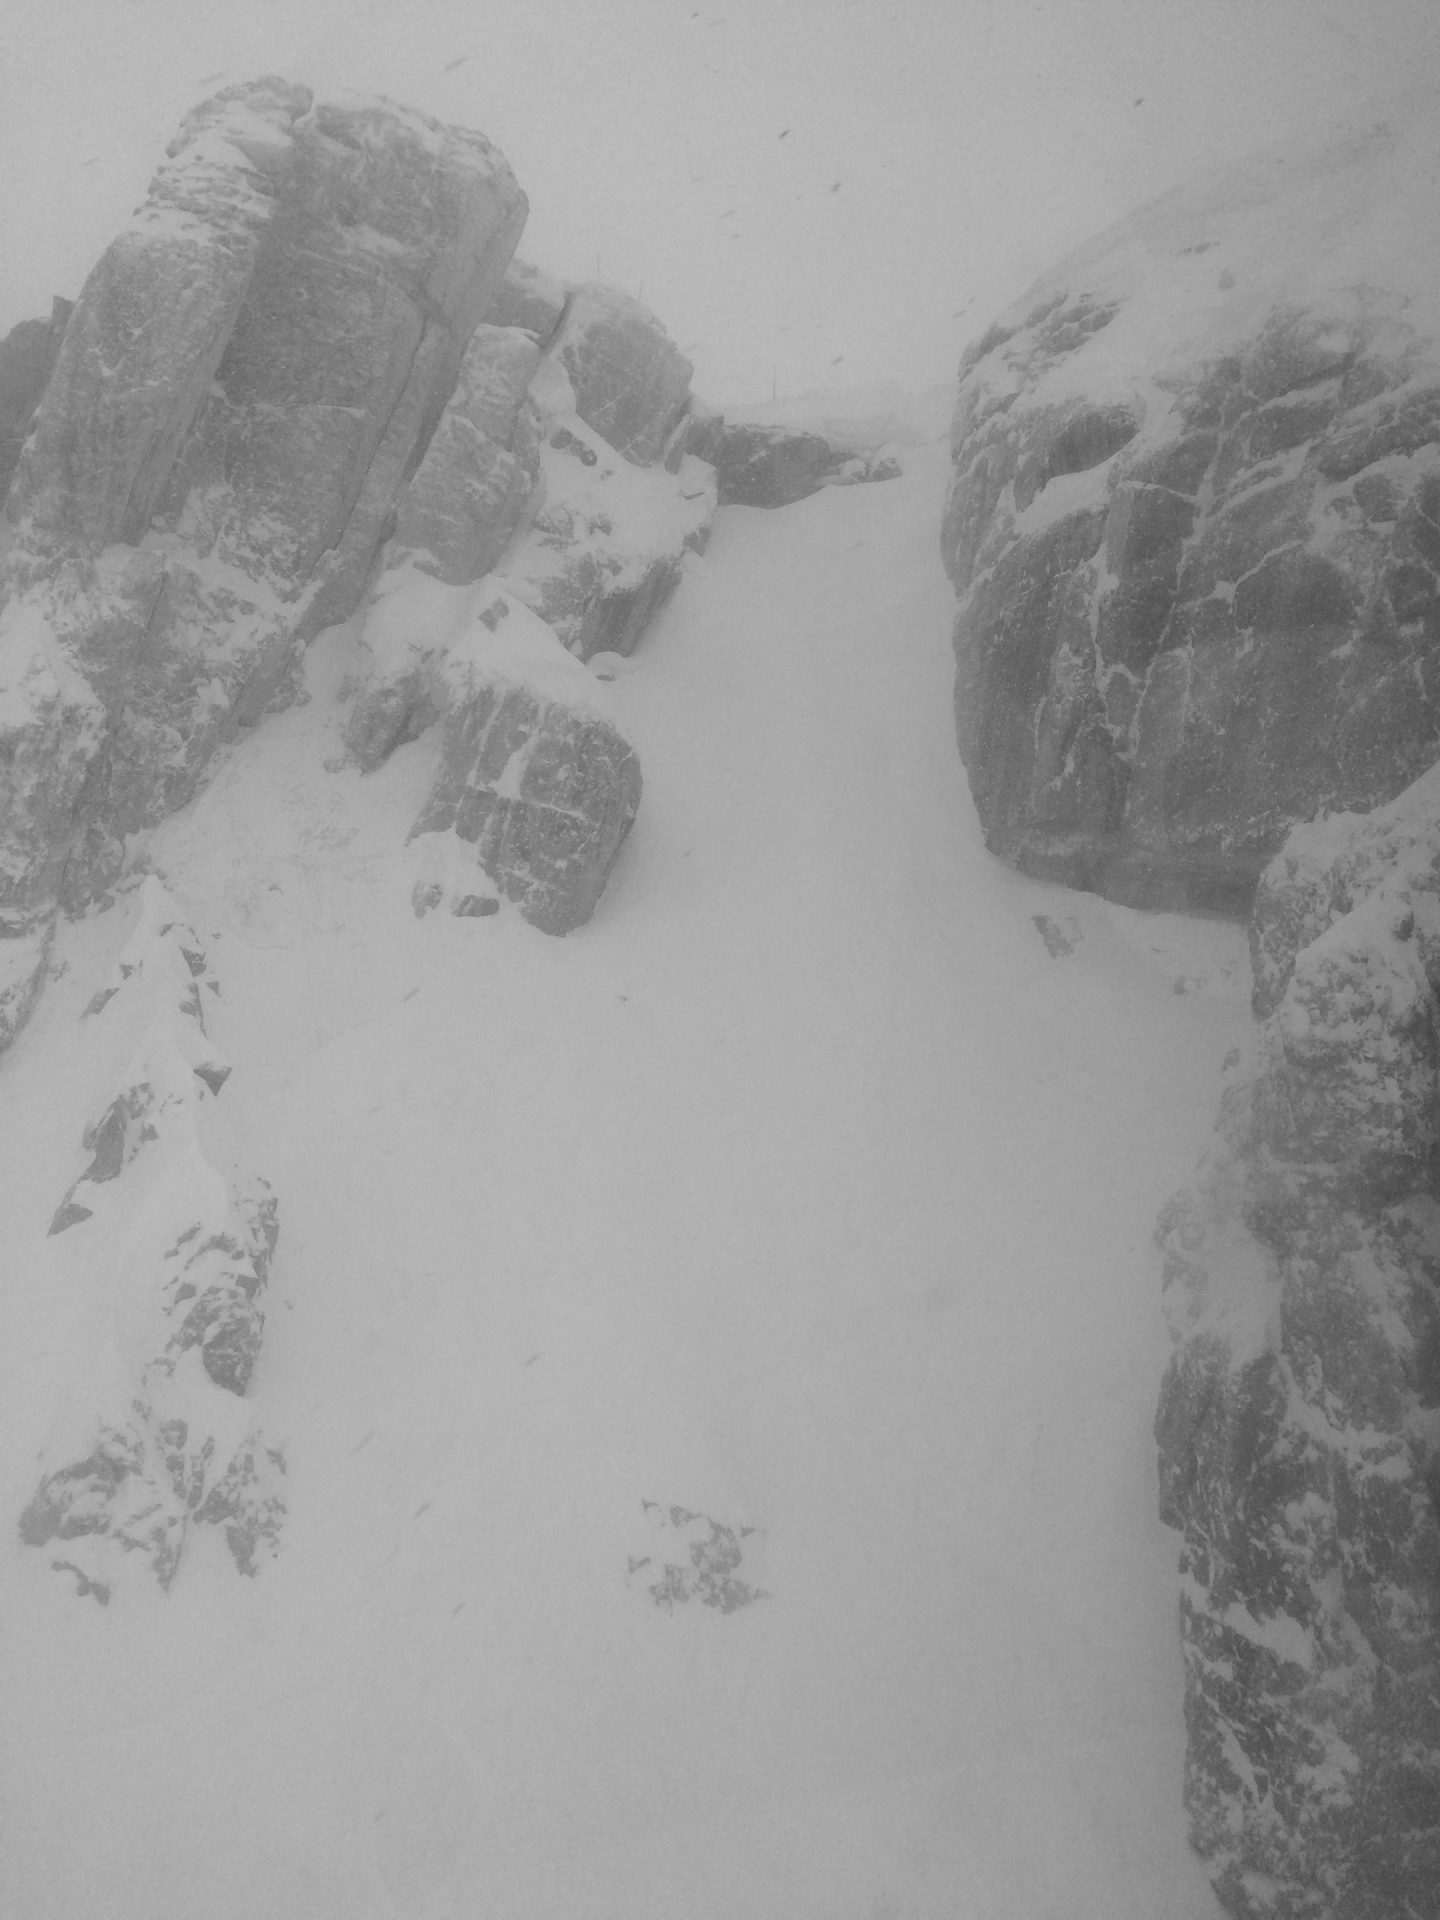 Corbet’s Couloir from Jackson Hole’s Tram